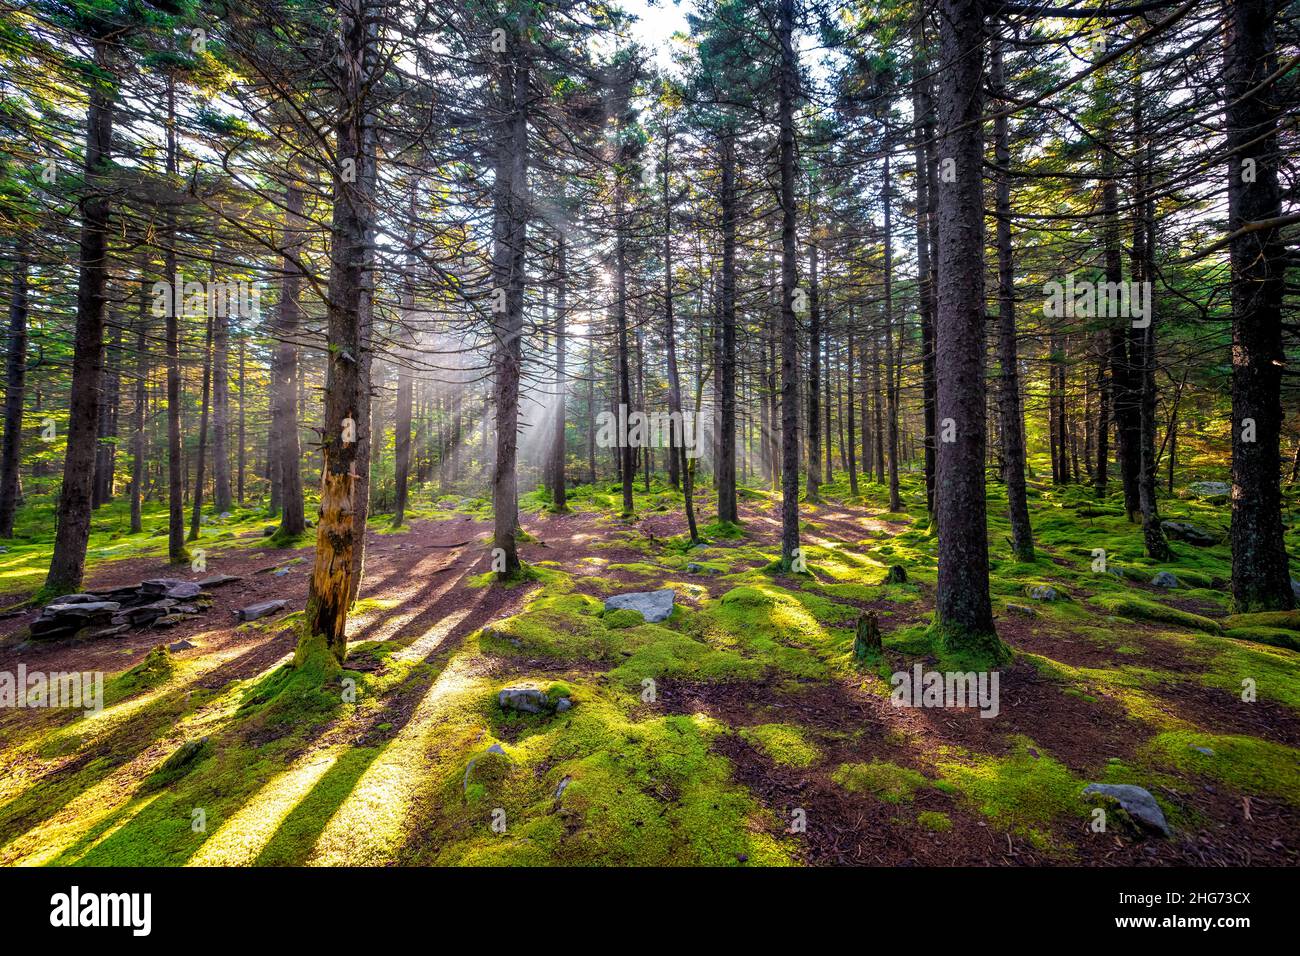 Conifer dreamy fairy tale enchanted moss green dark forest sunrise sun rays behind tree trunks Huckleberry trail in Spruce Knob mountains West Virgini Stock Photo